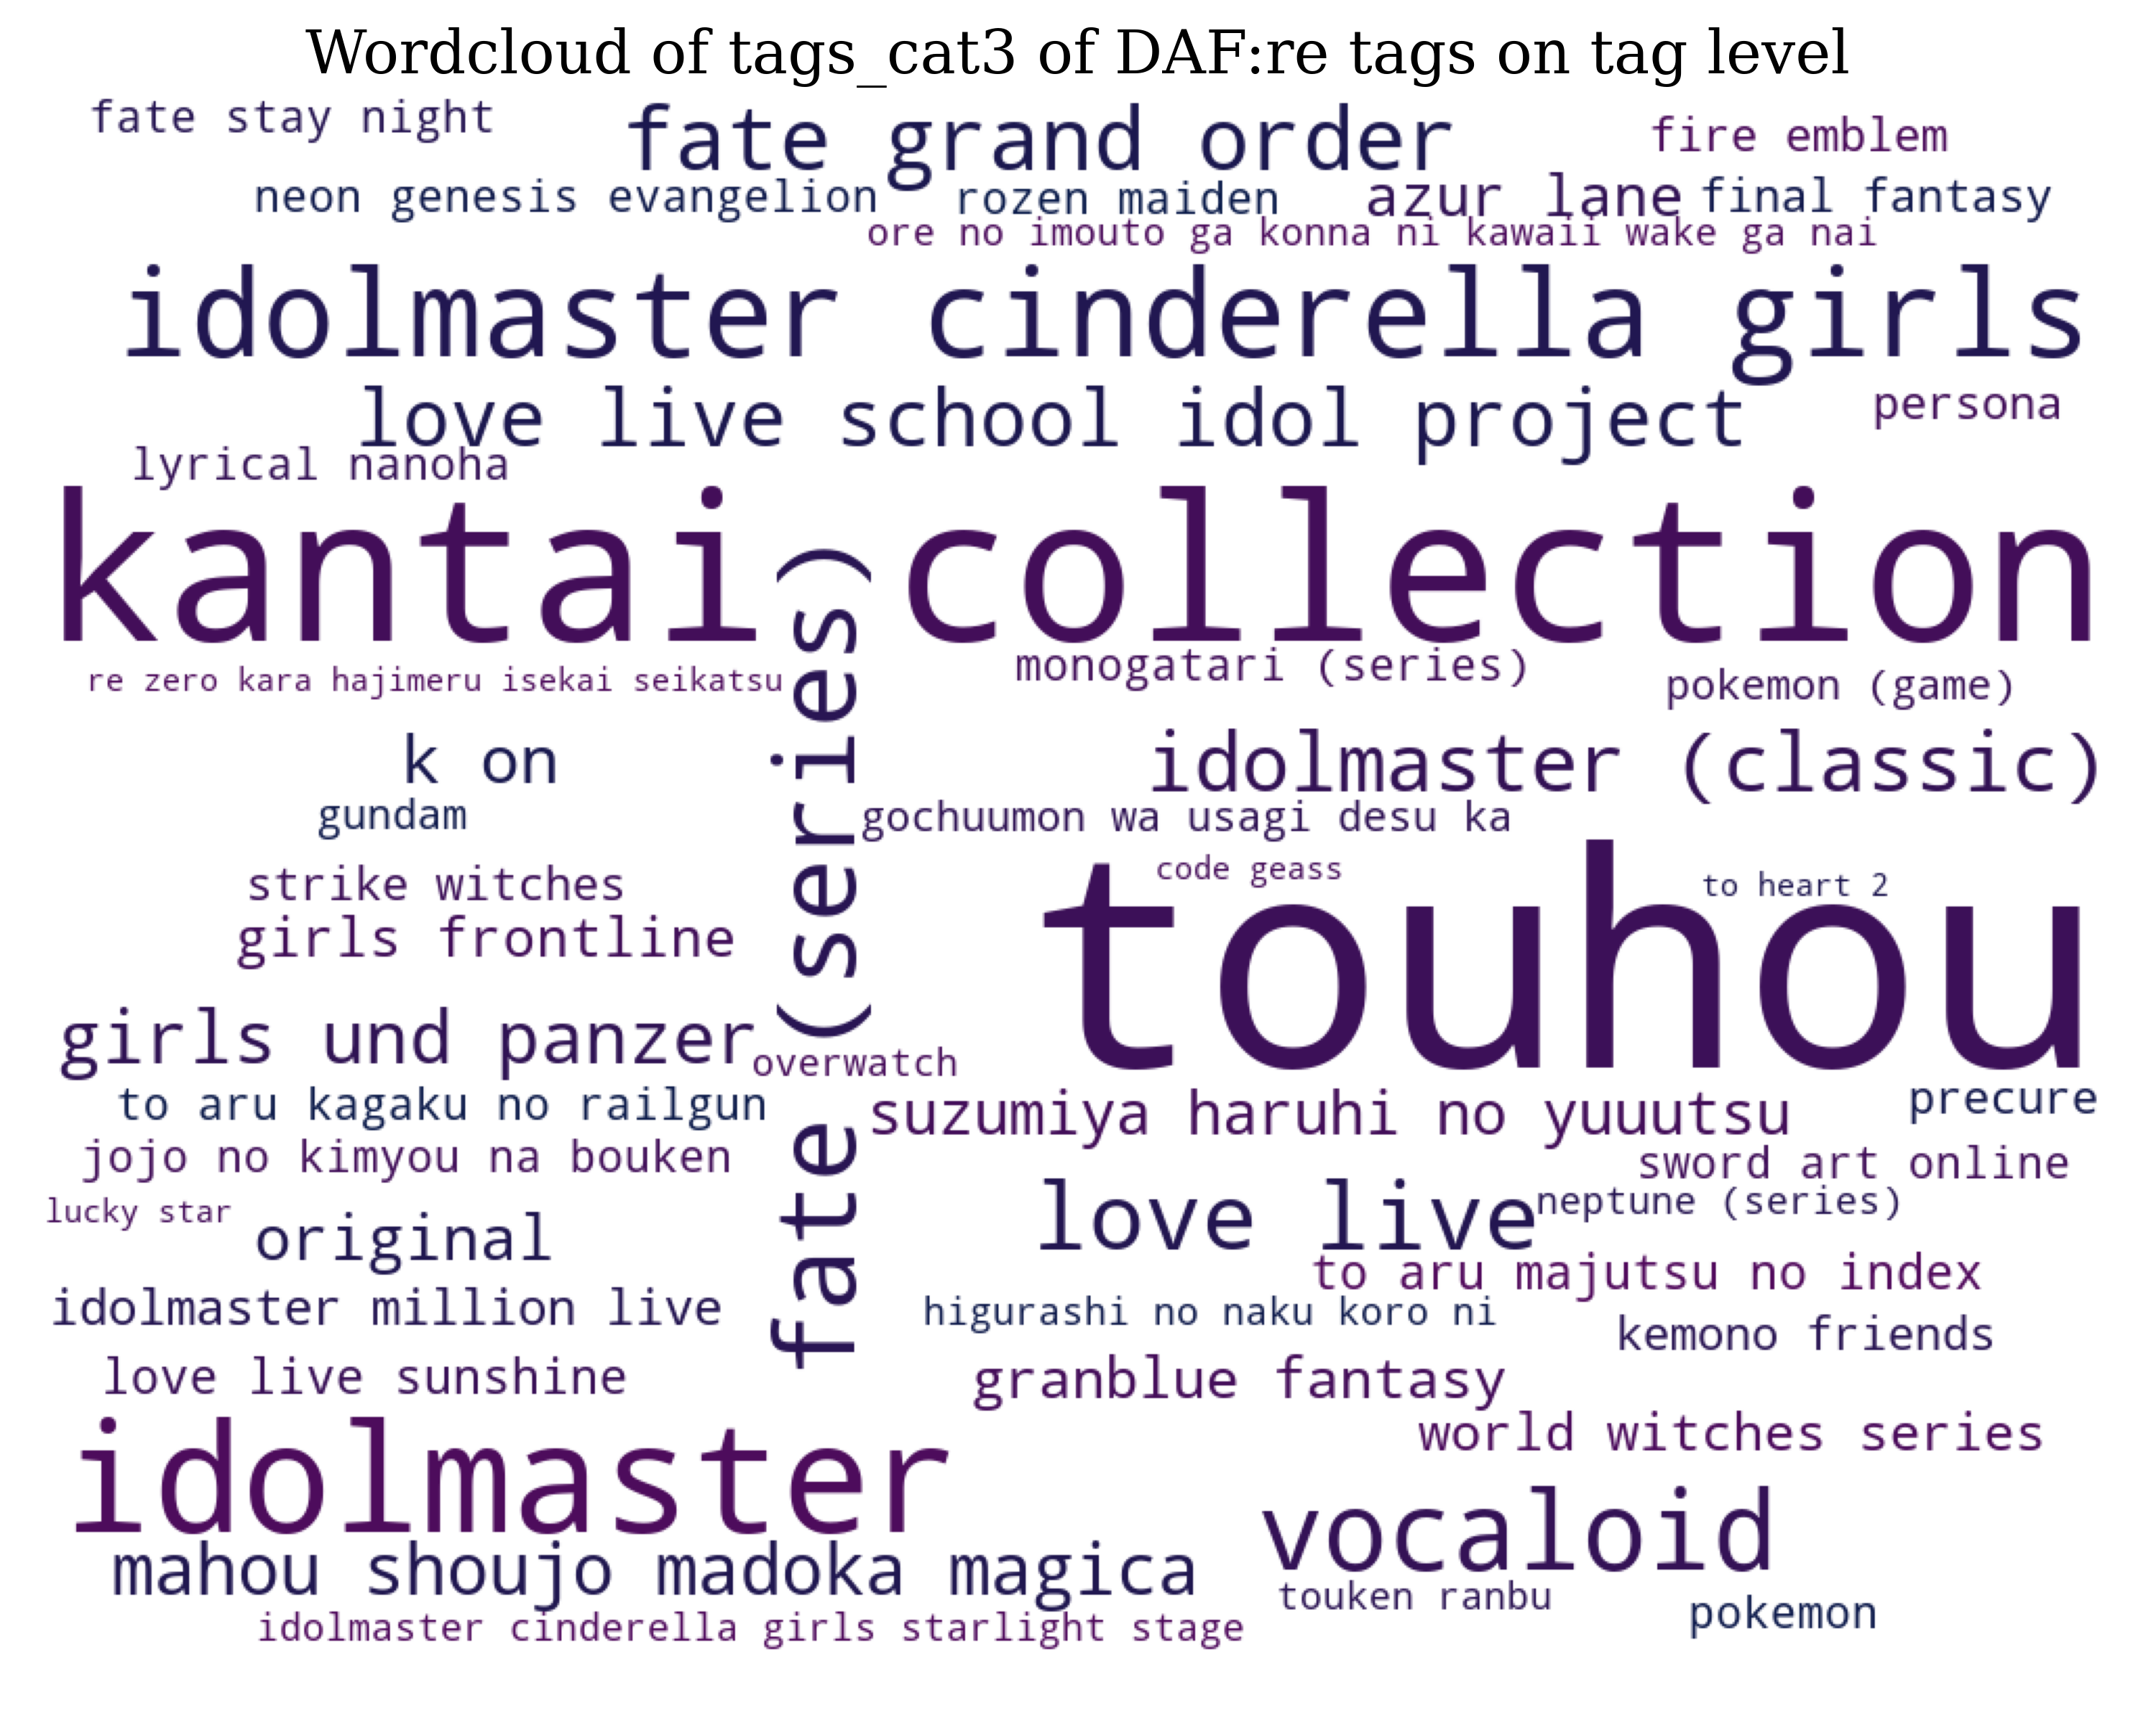 wordcloud_dafre_tags_symbolsremoved_minlen2_minapp2_profsremoved_filledempty_tags_cat3_tag.png